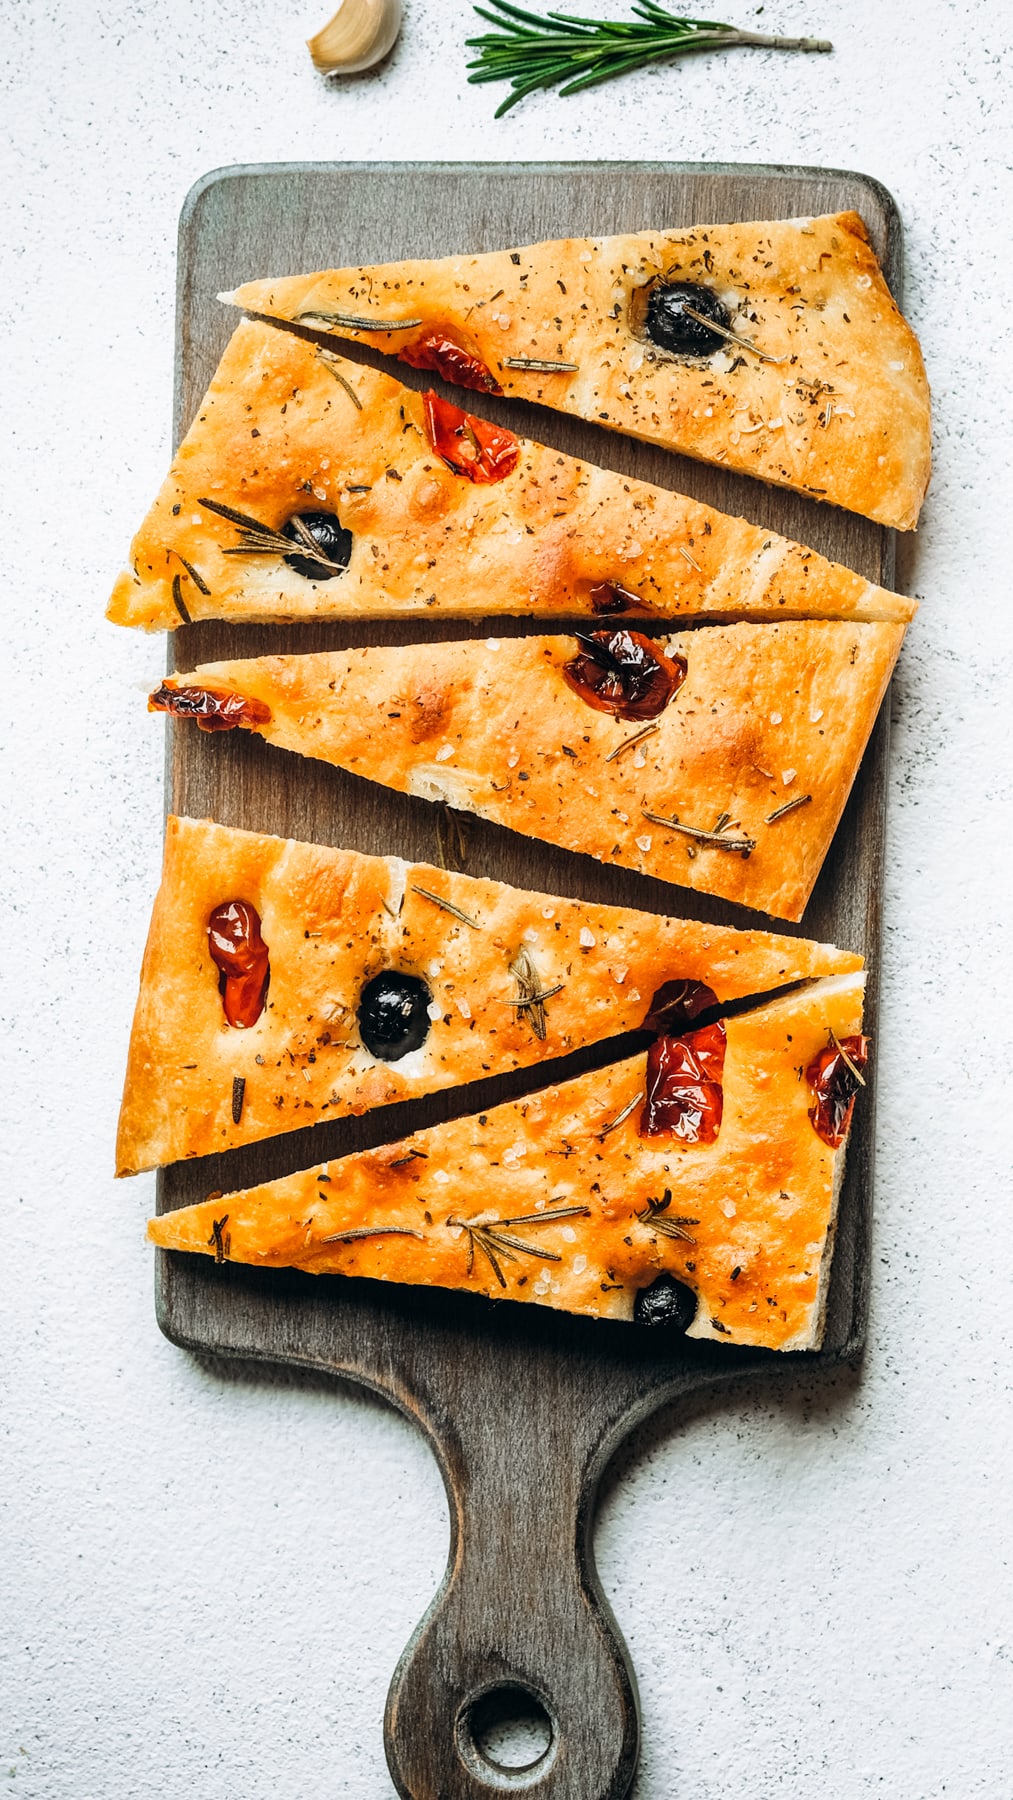 Overhead image of cut up focaccia arranged on a gray wooden board.